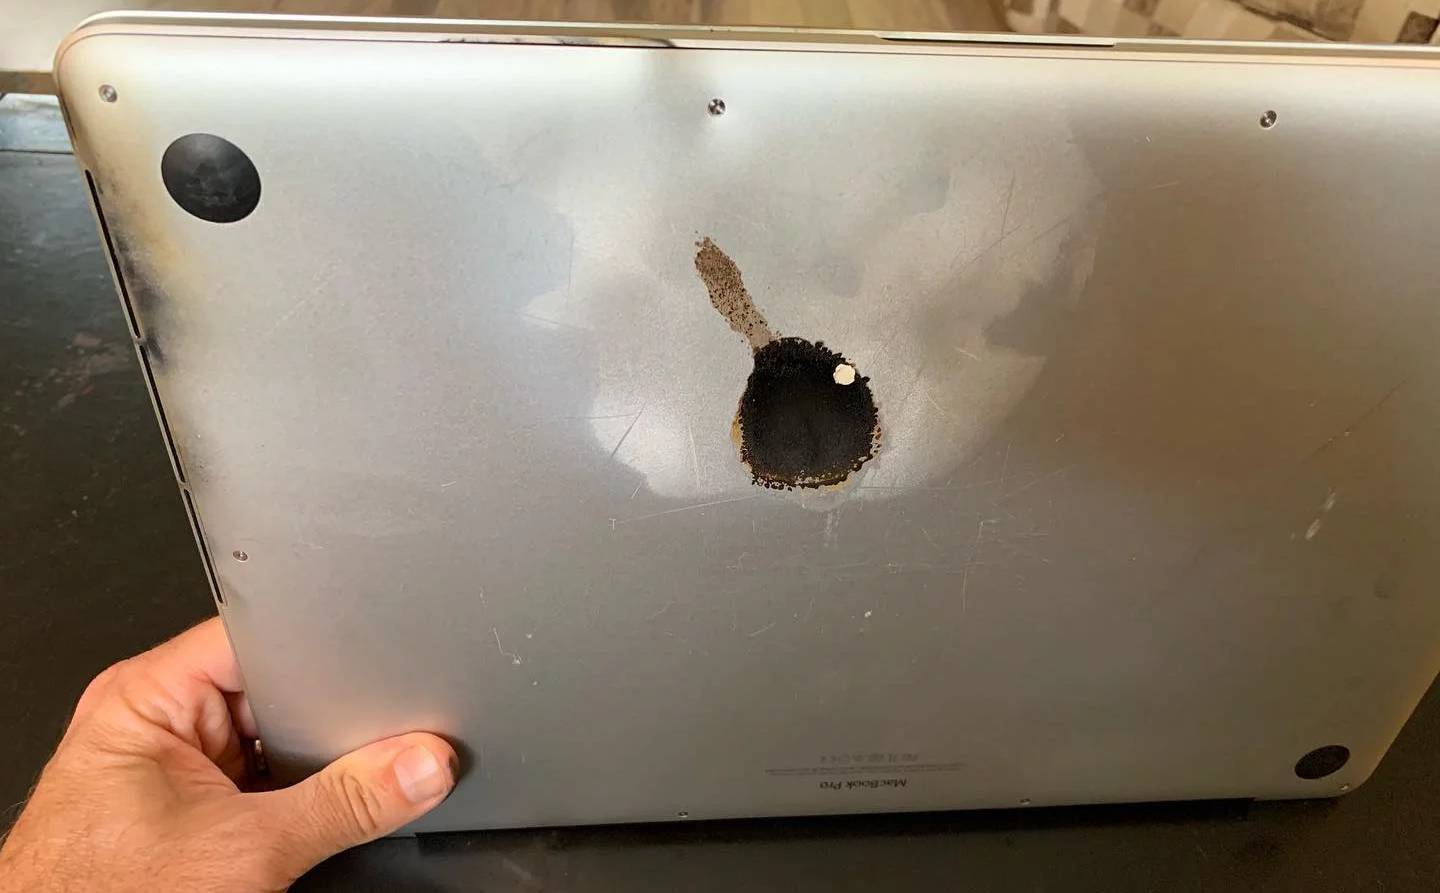 macbook pro 15 inch battery exploded